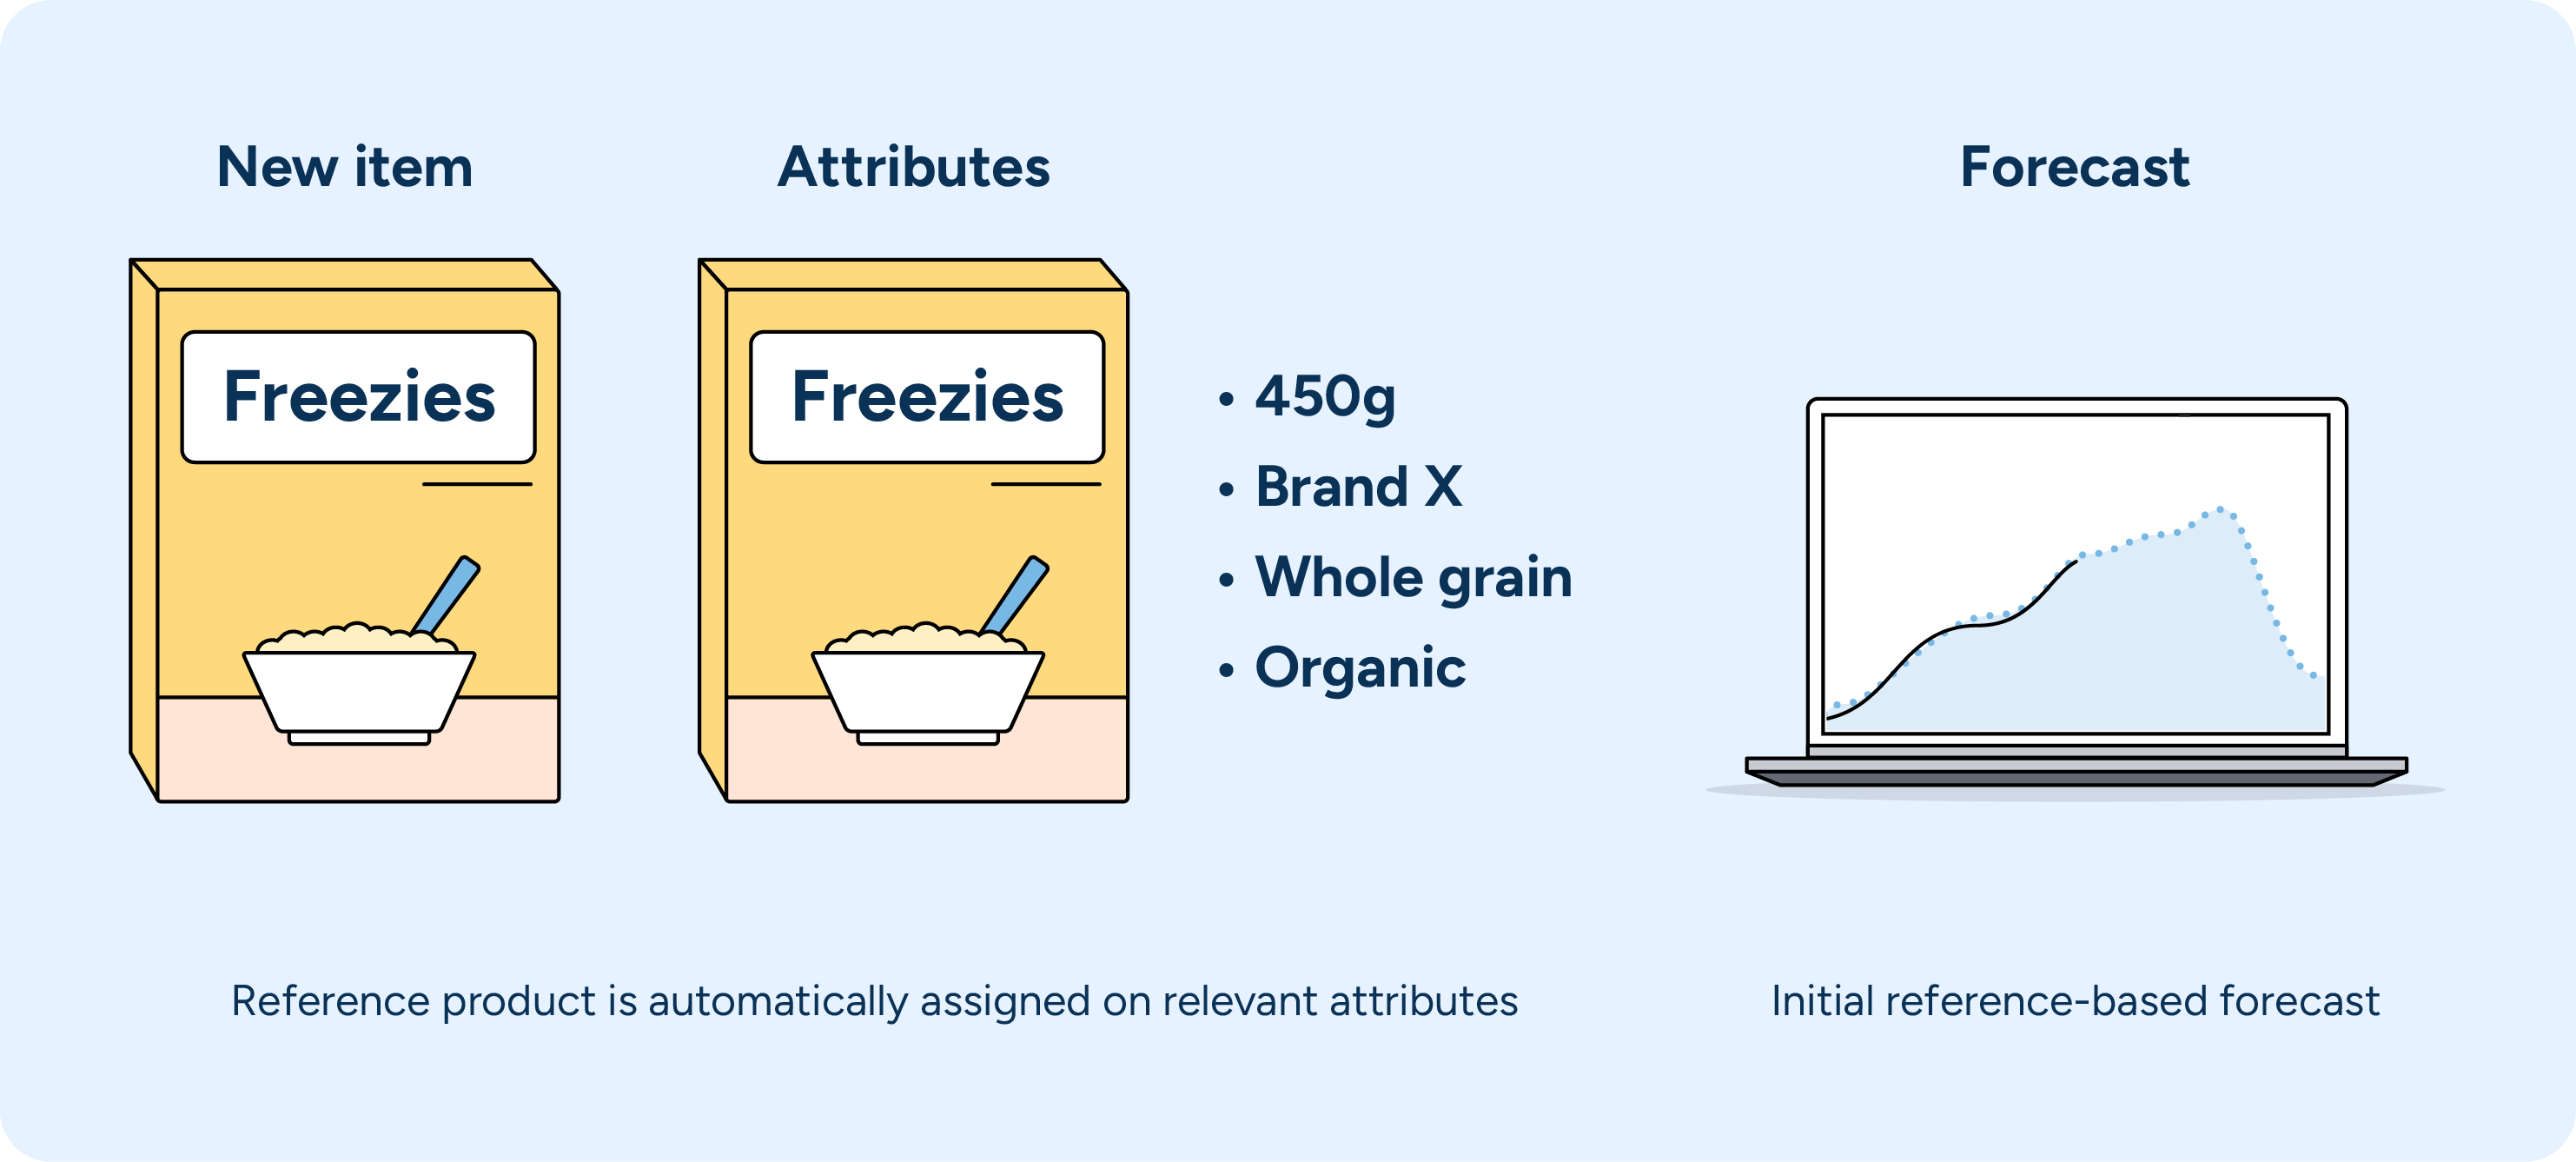 An illustration showing how attributes from comparable products are used in demand forecasting.